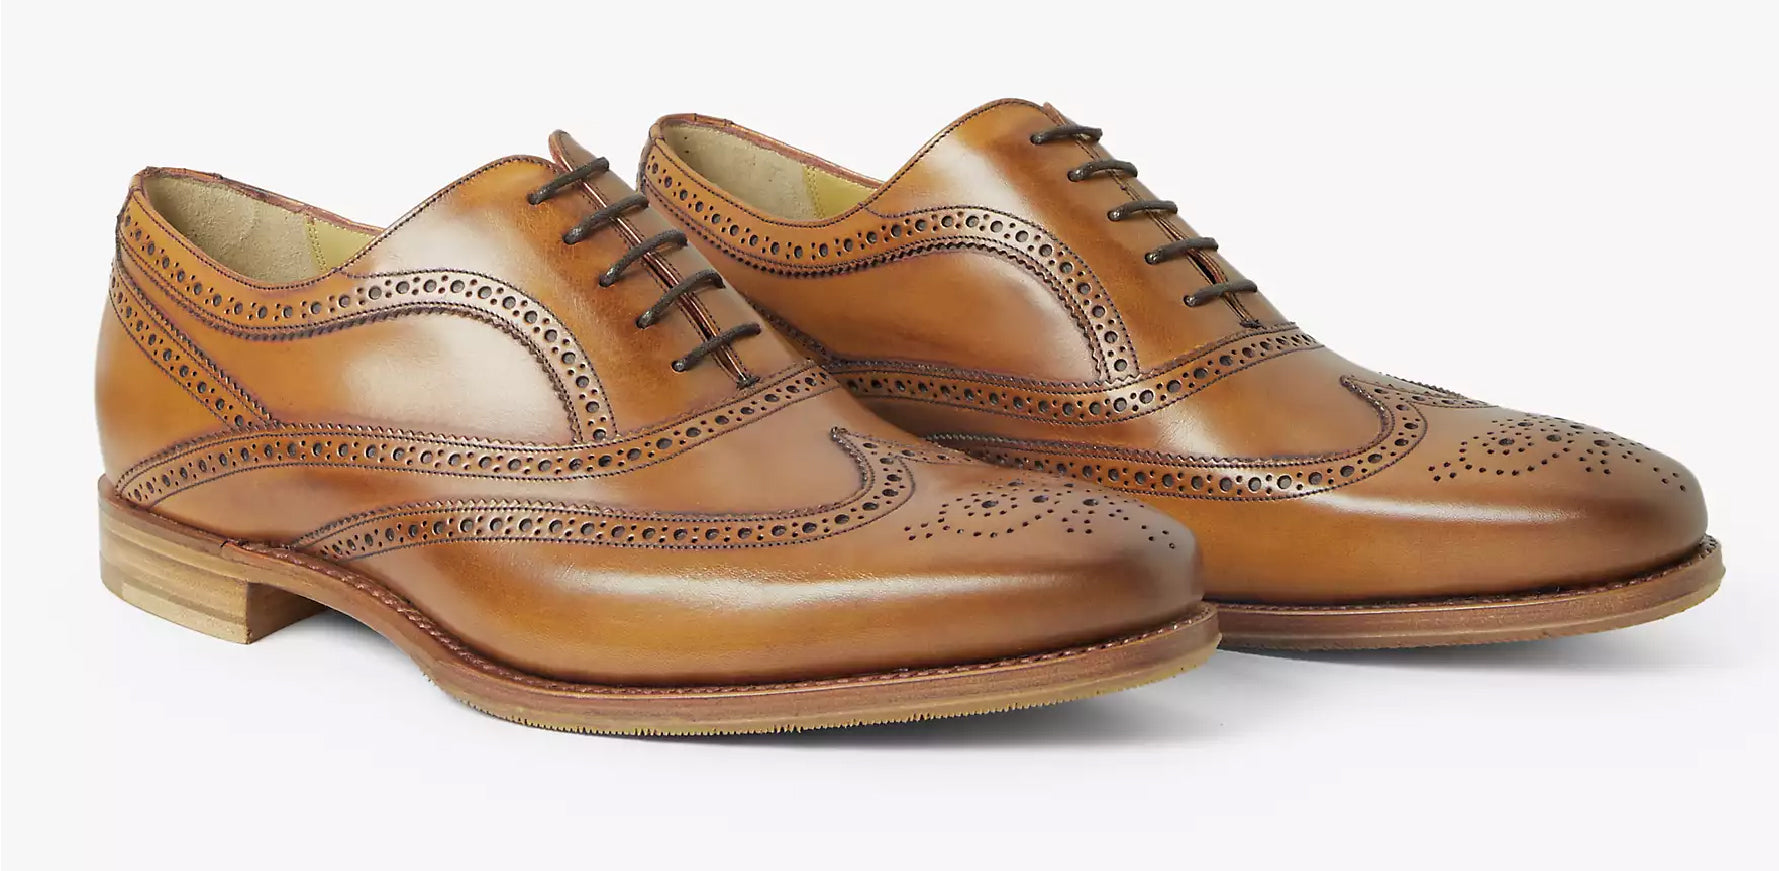 Turing - Men's Brown Leather Brogue Shoe From Barker Tech Collection